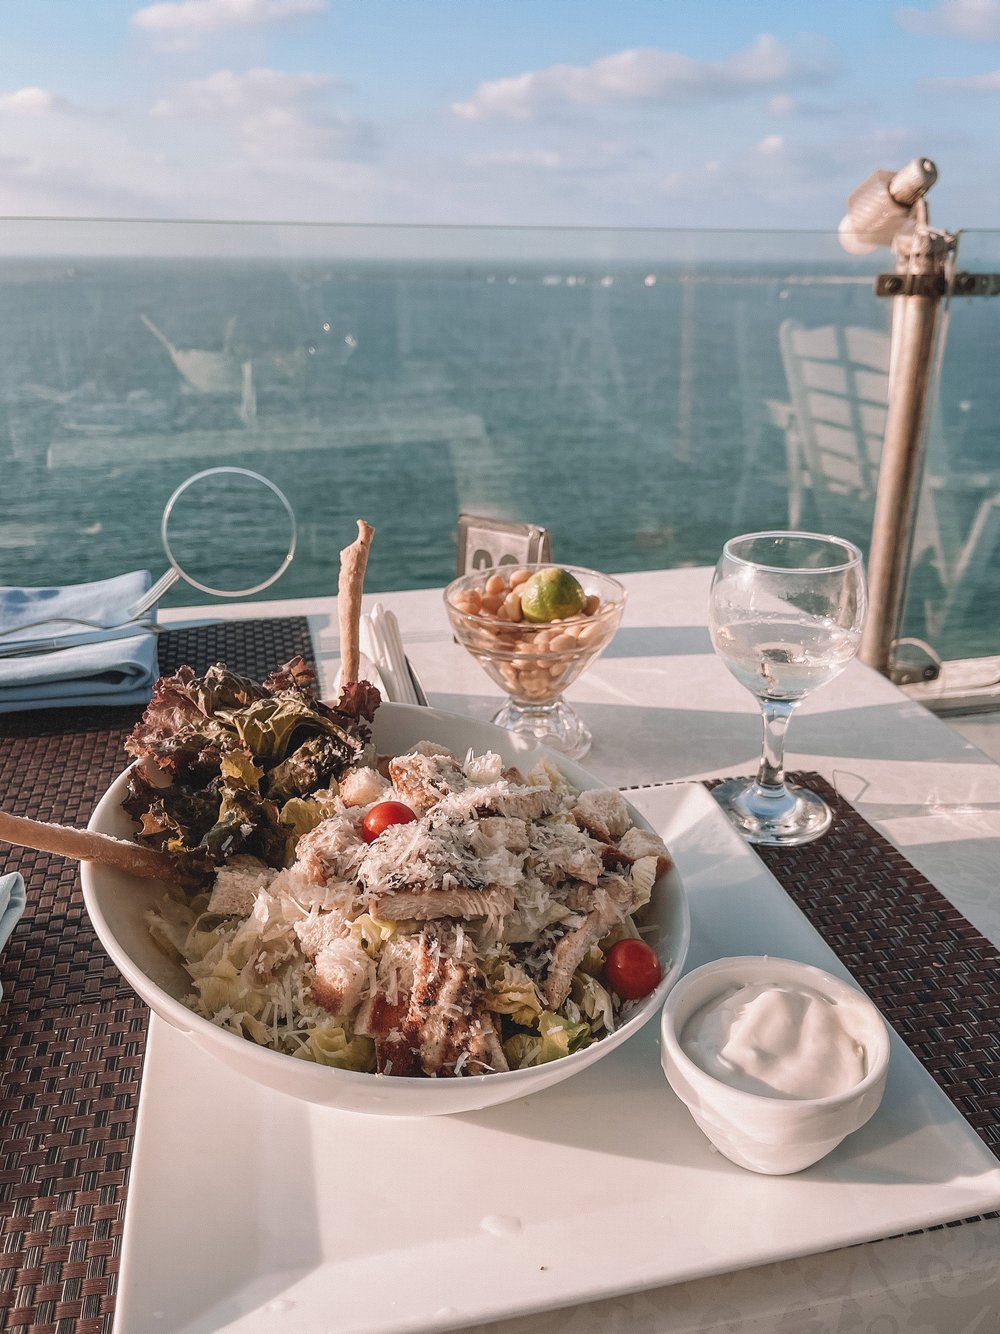 Ceasar salad for lunch at the Windsor Palace - Alexandria - Egypt